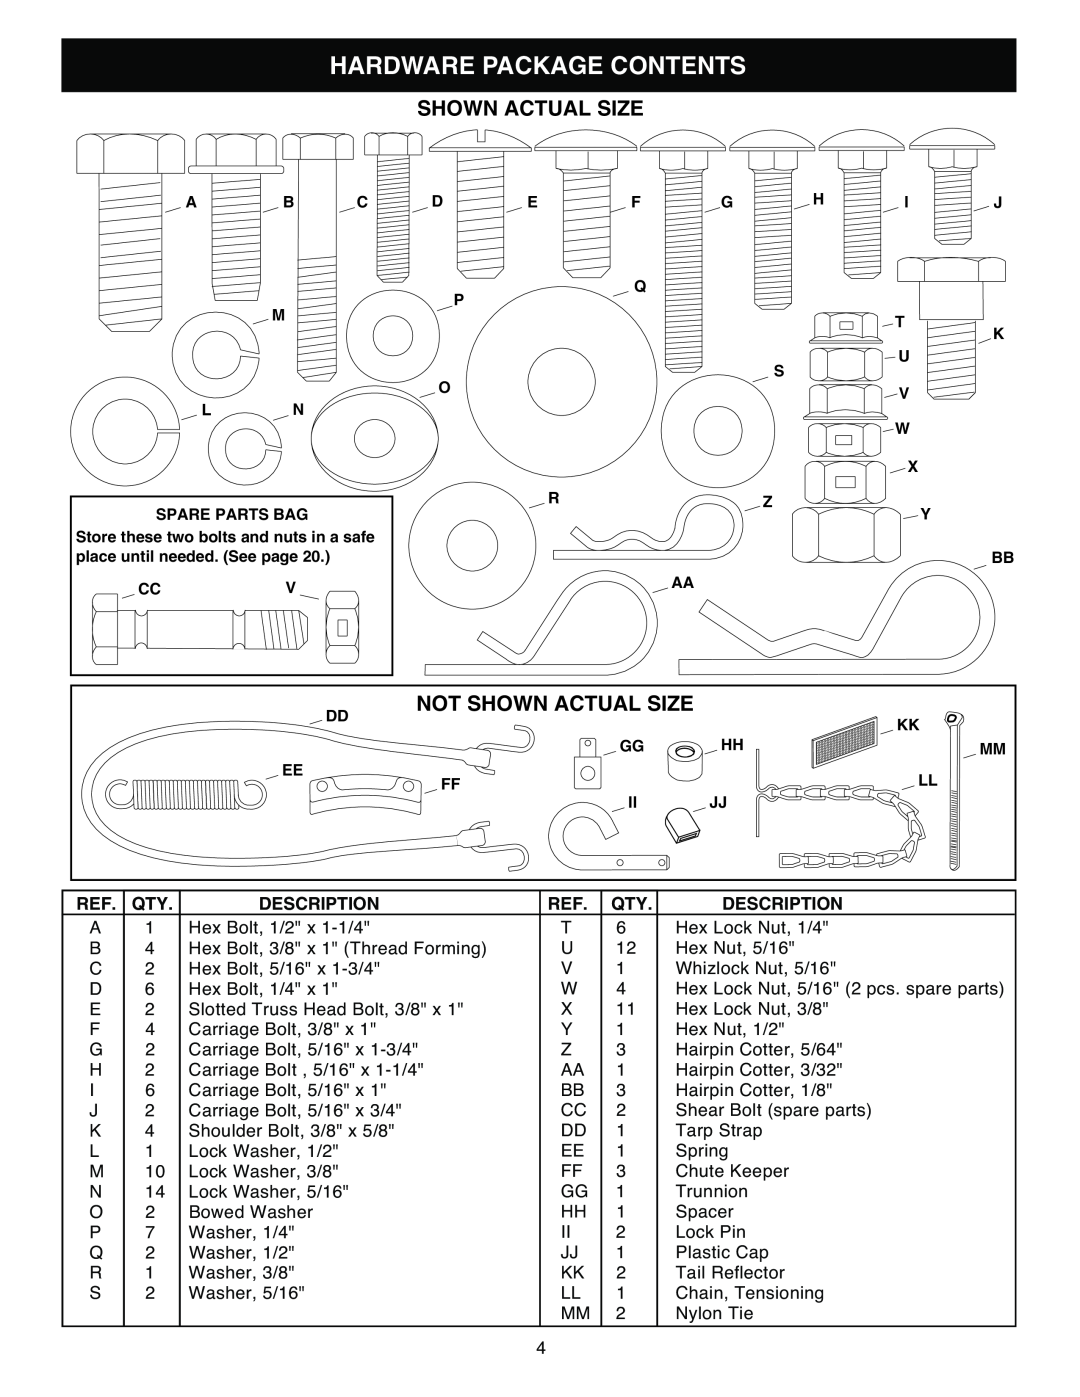 Sears 486.248392 owner manual Hardware Package Contents, Not Shown Actual Size 